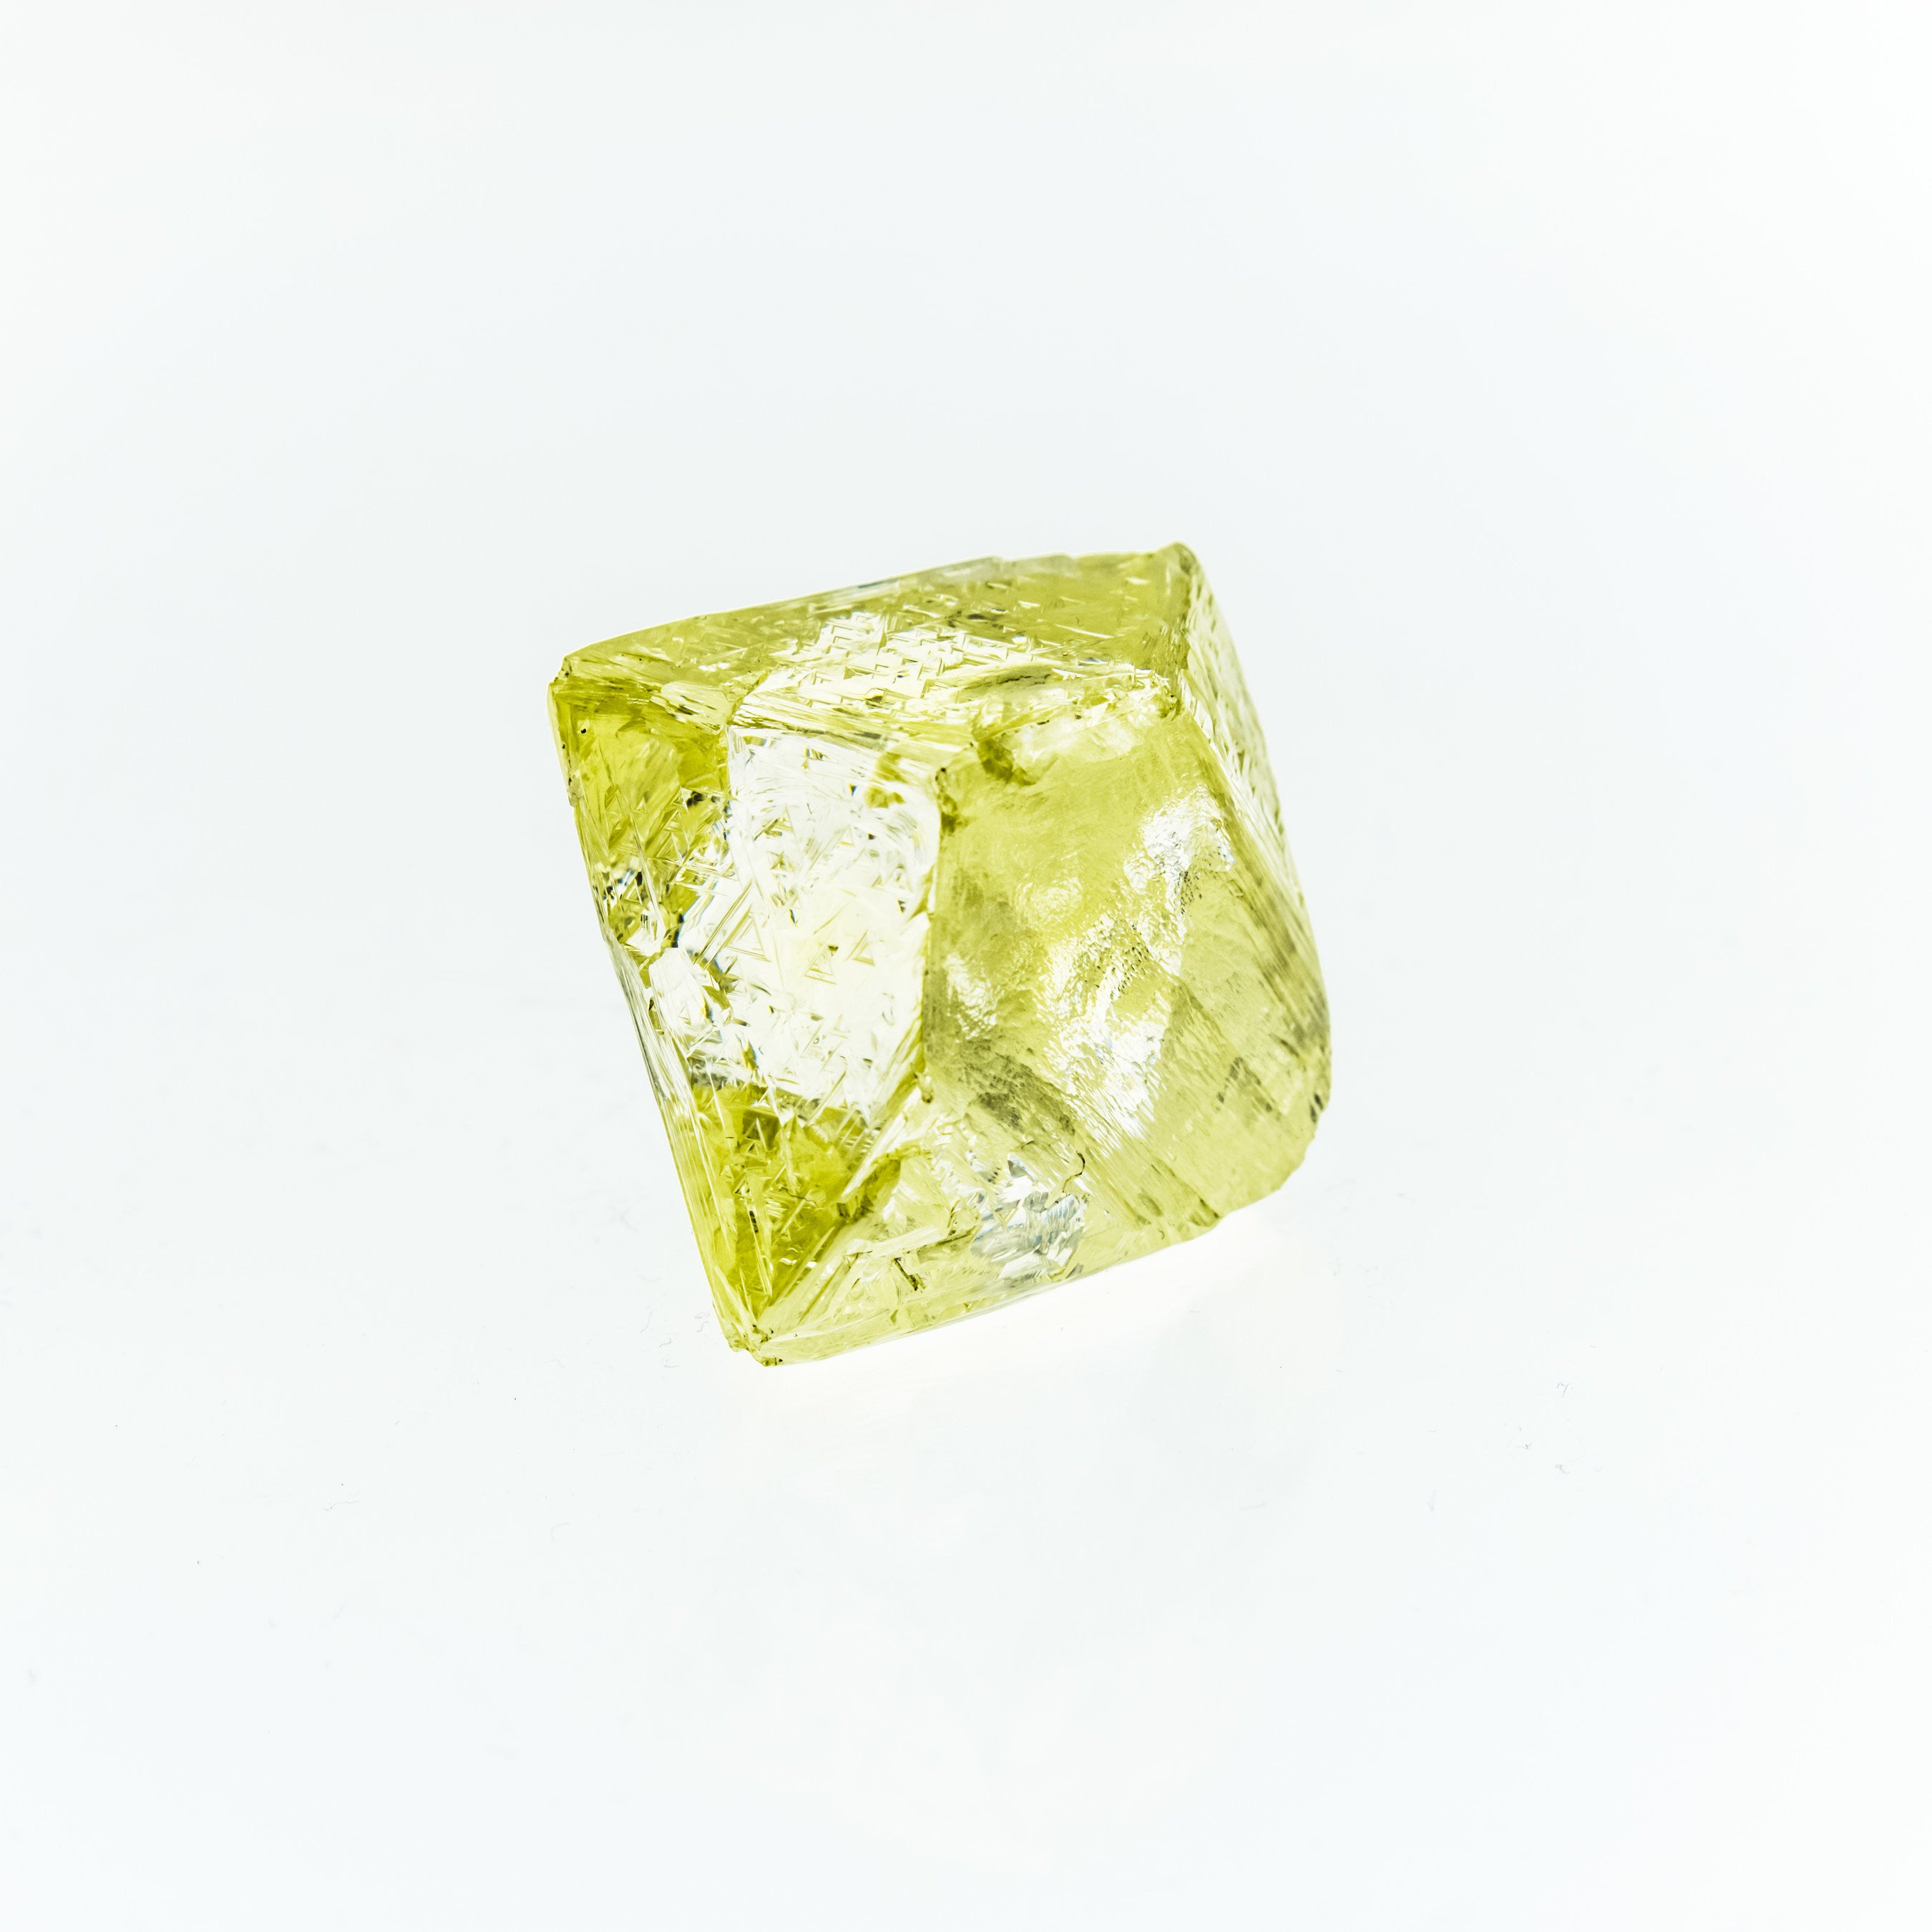 151 Carat Yellow Diamond To Be Sold In Antwerp